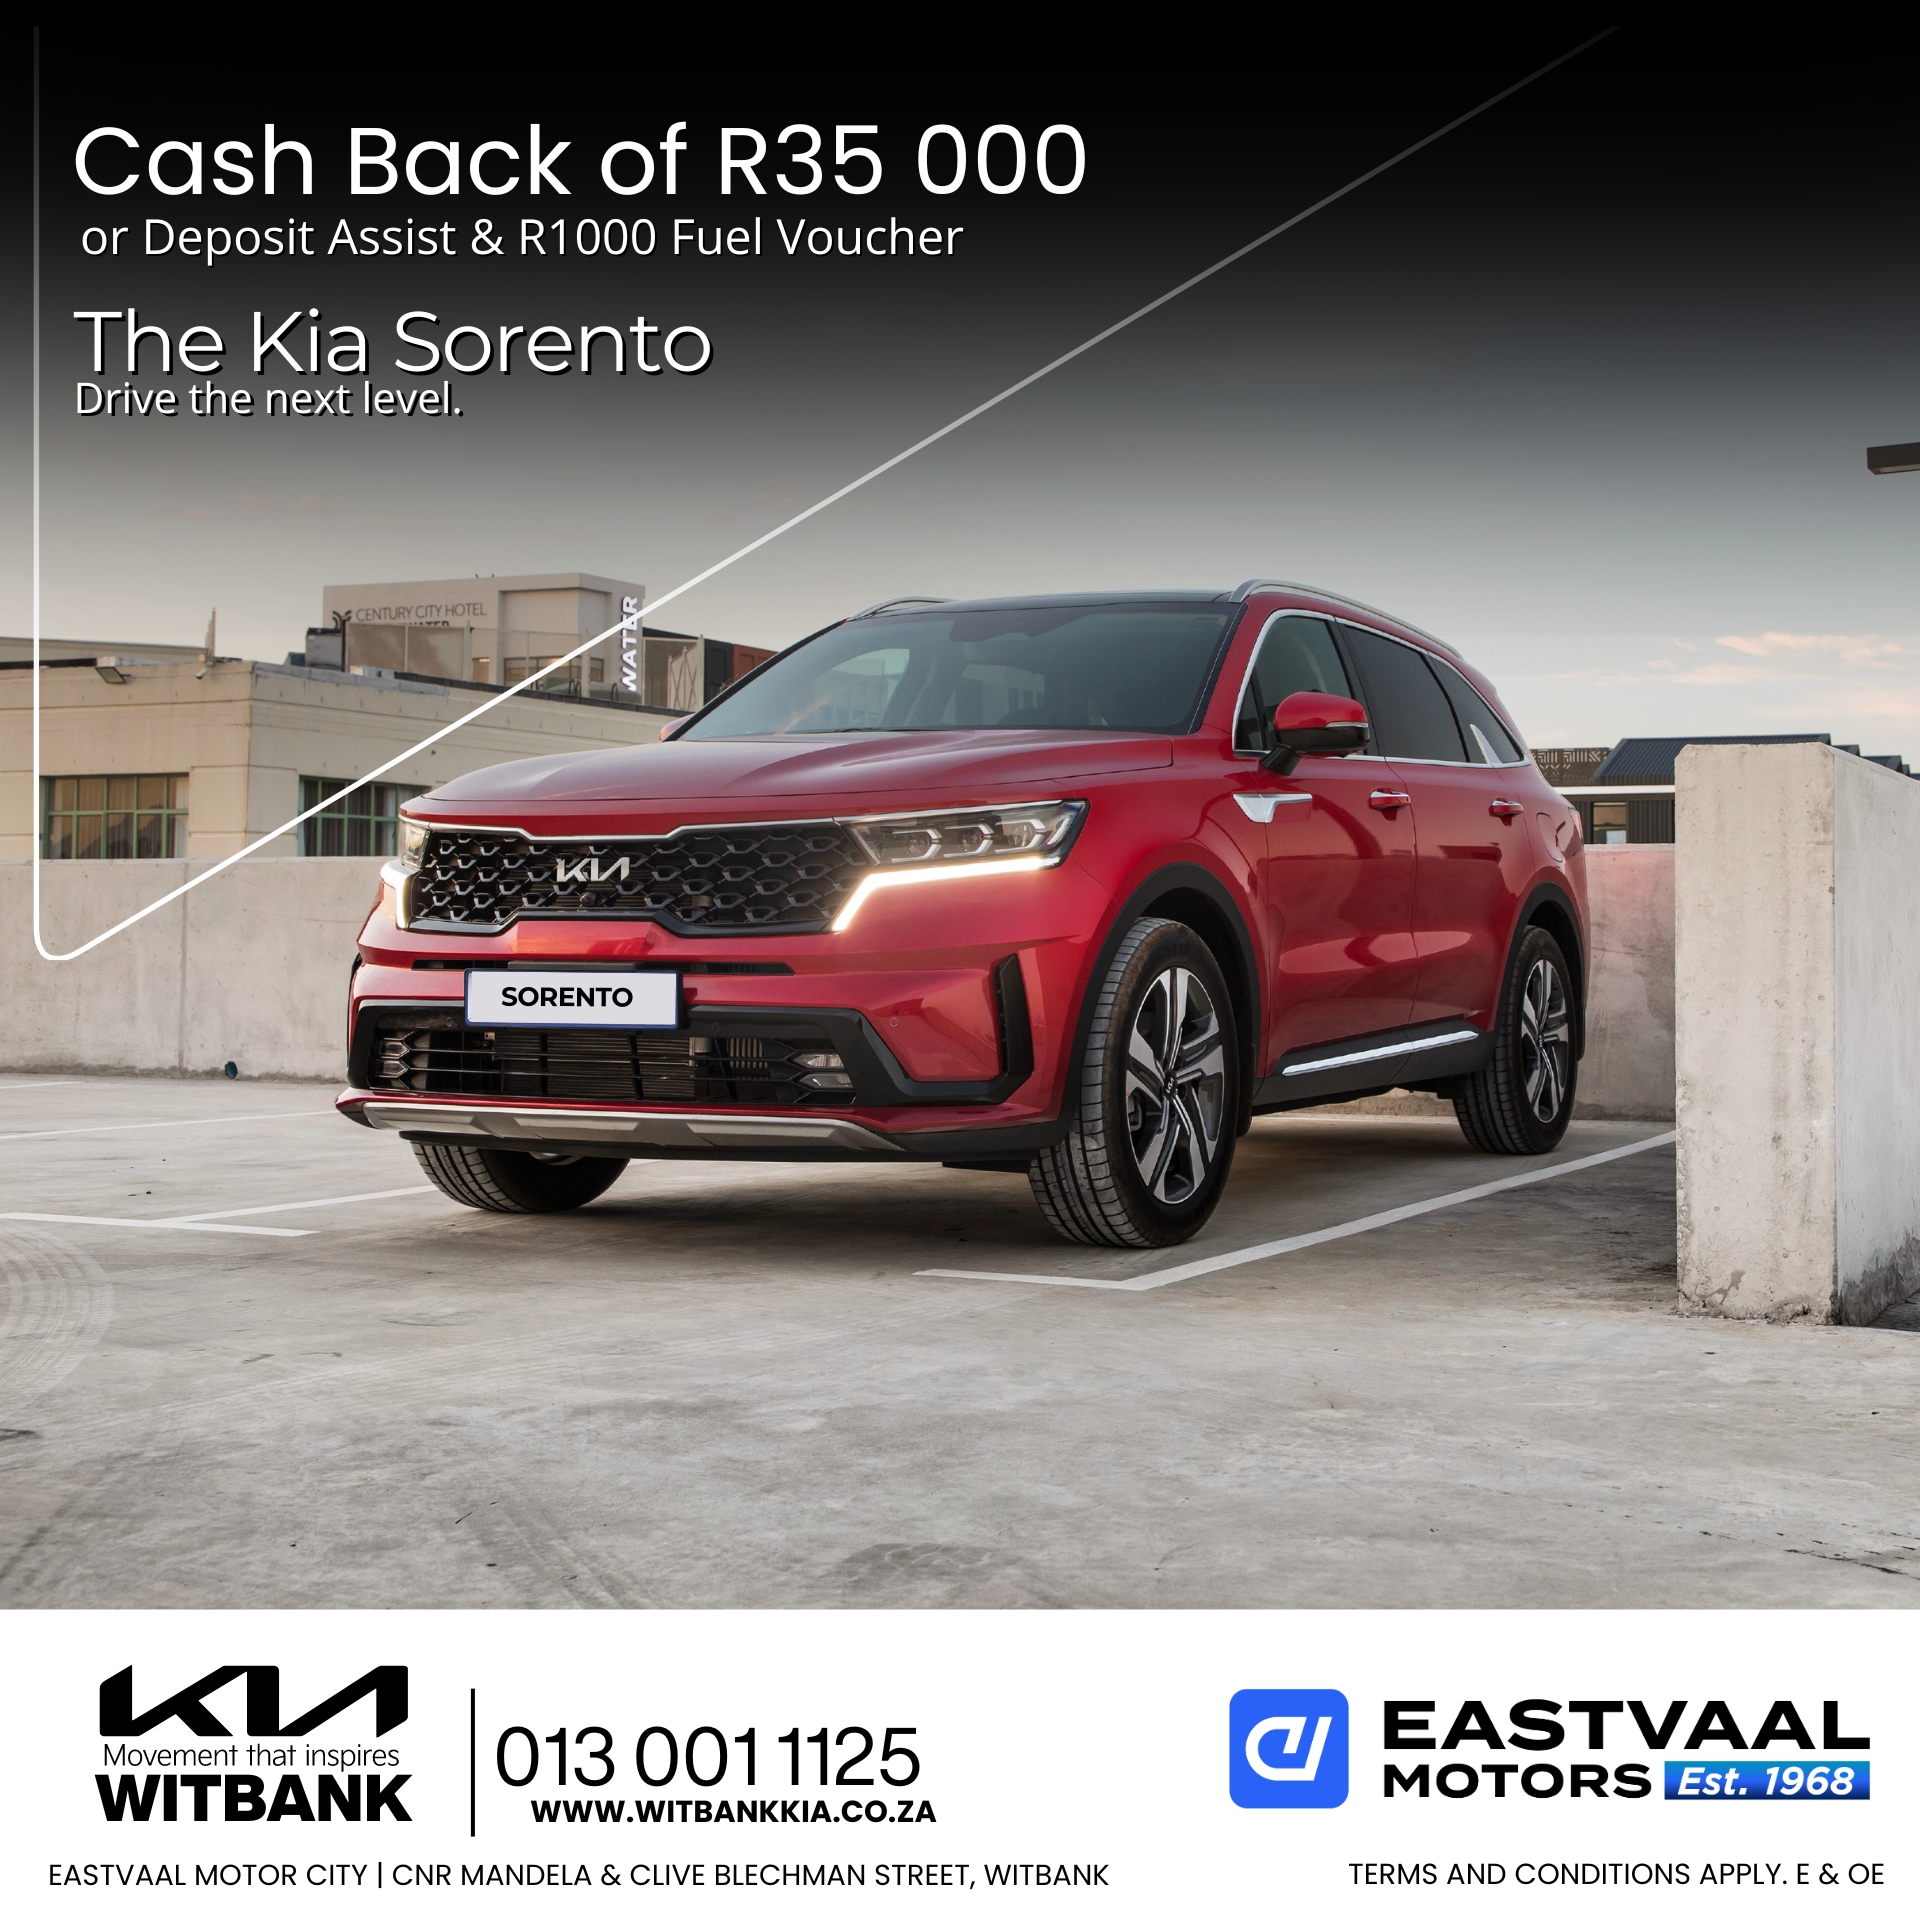 Upgrade your ride this July with amazing deals on Kia vehicles at Eastvaal Motor City.” image from Eastvaal Motors